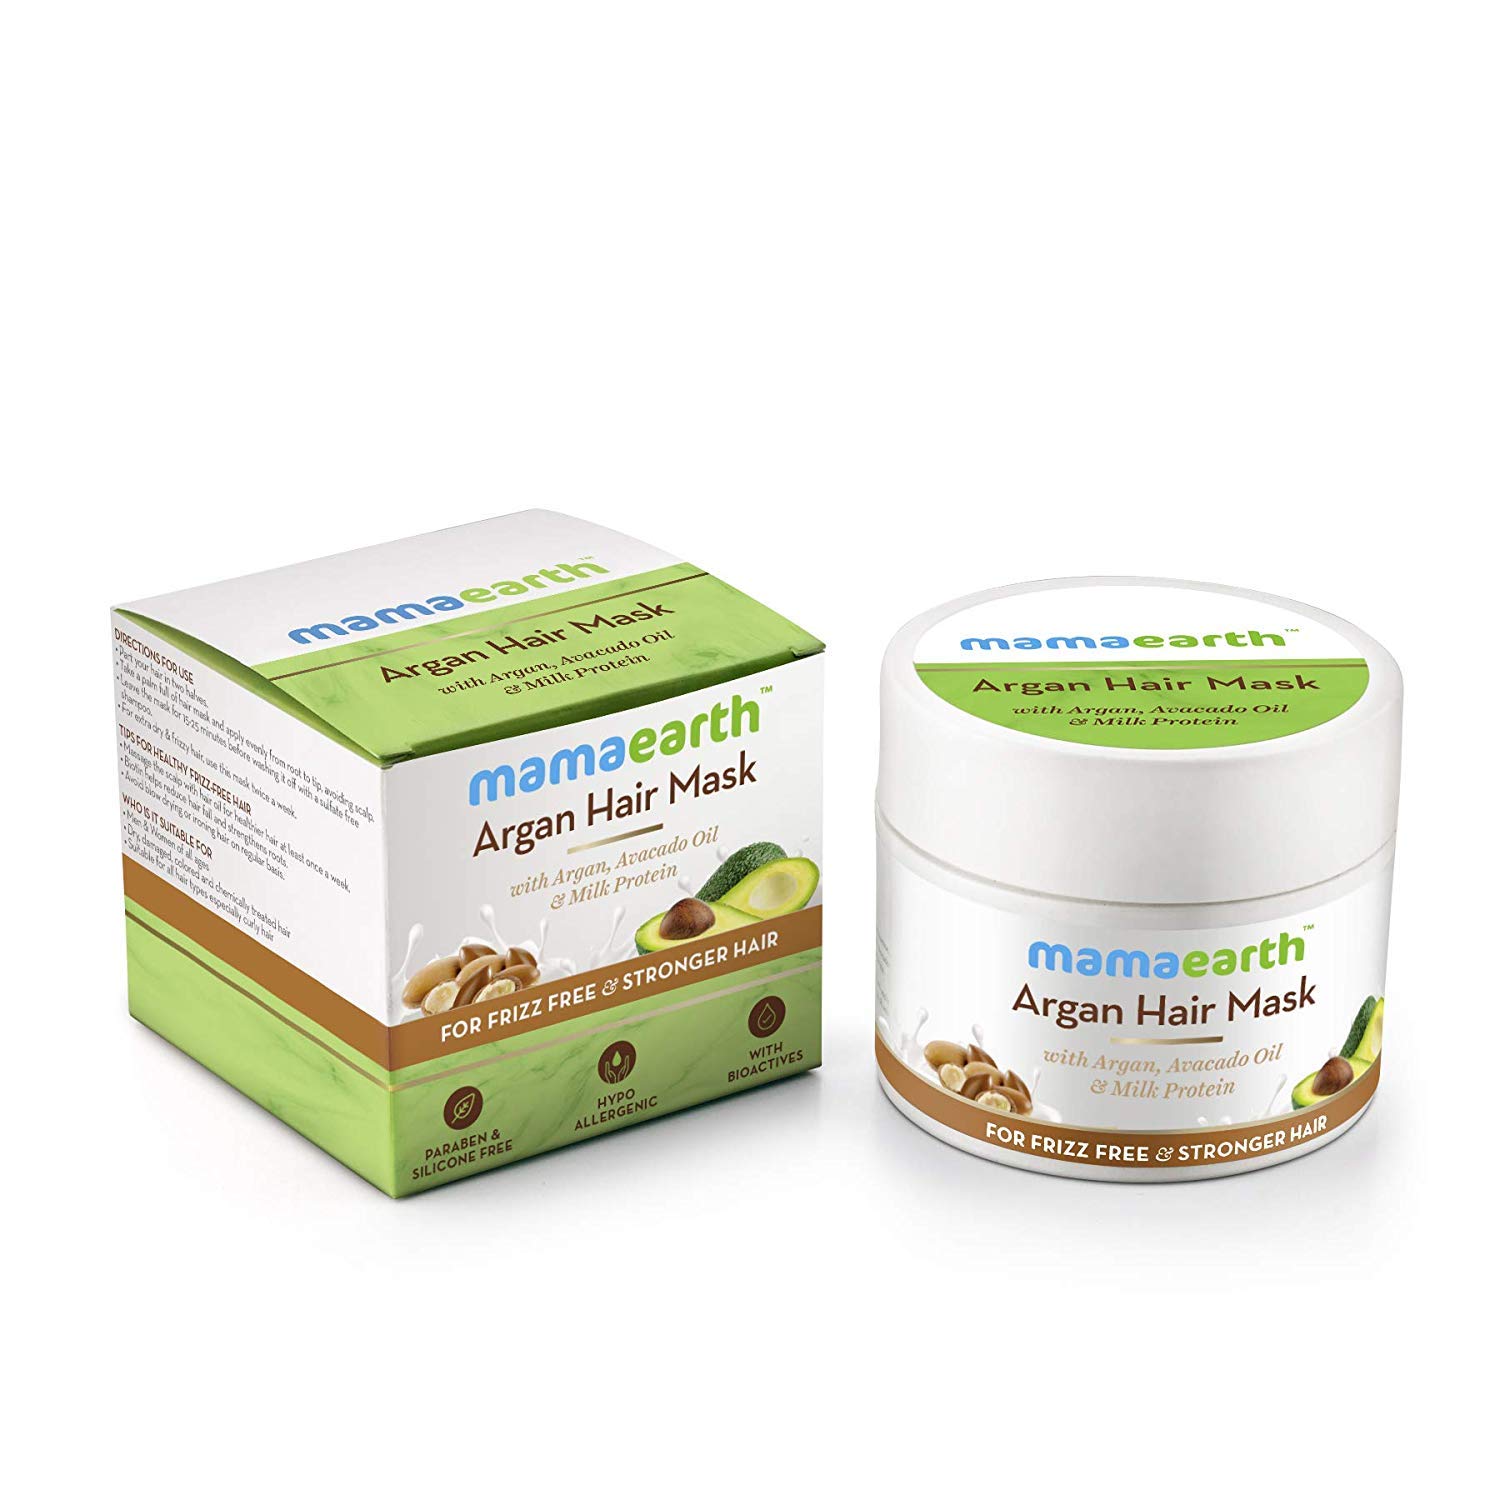 Mamaearth Products Review 2022 - Skin, Hair and Baby Care Products